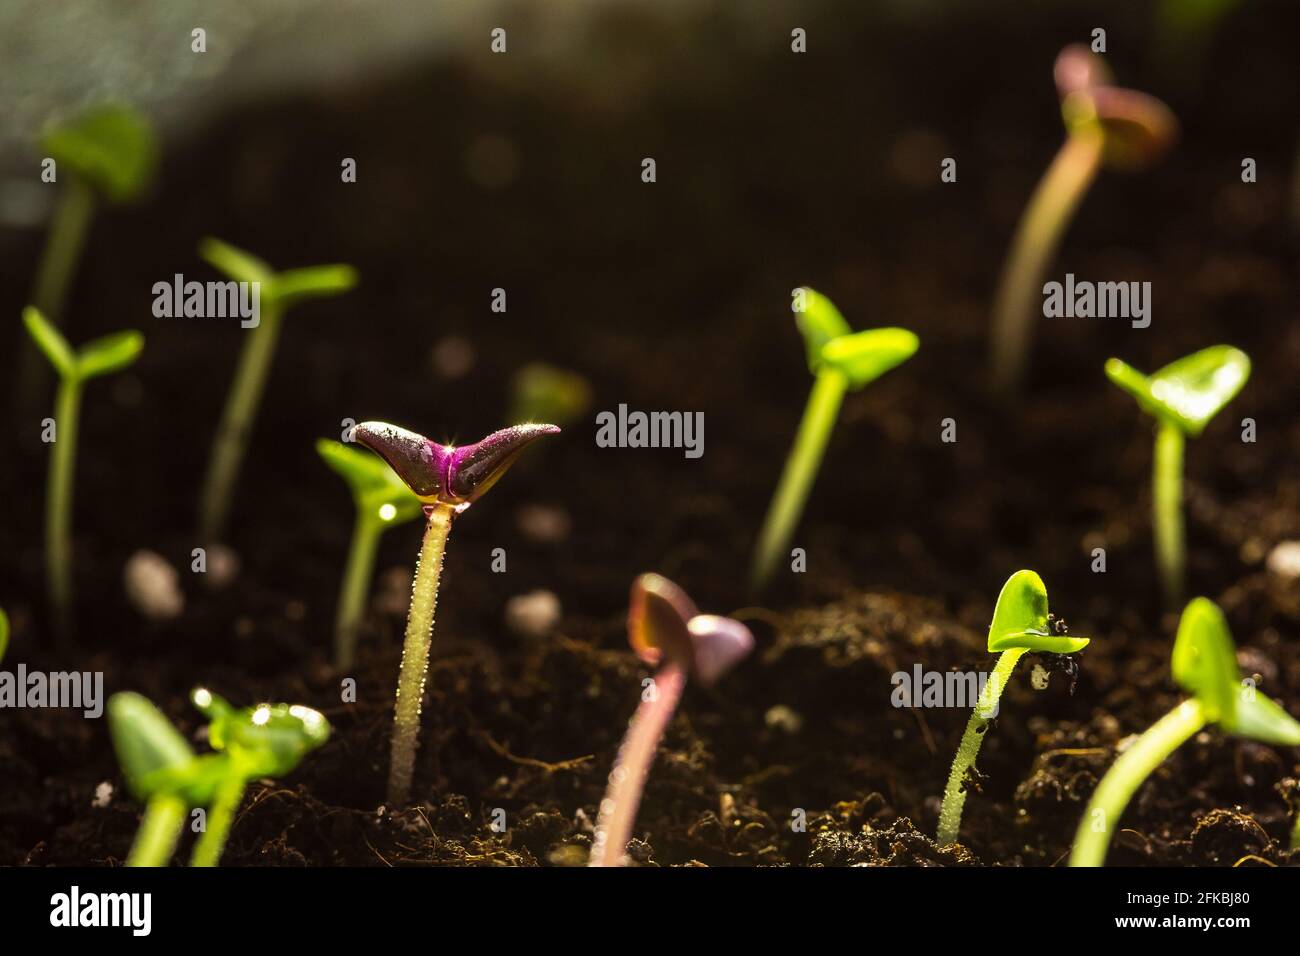 Young basil seedlings growing in the soil in a pot. New growth concept Stock Photo